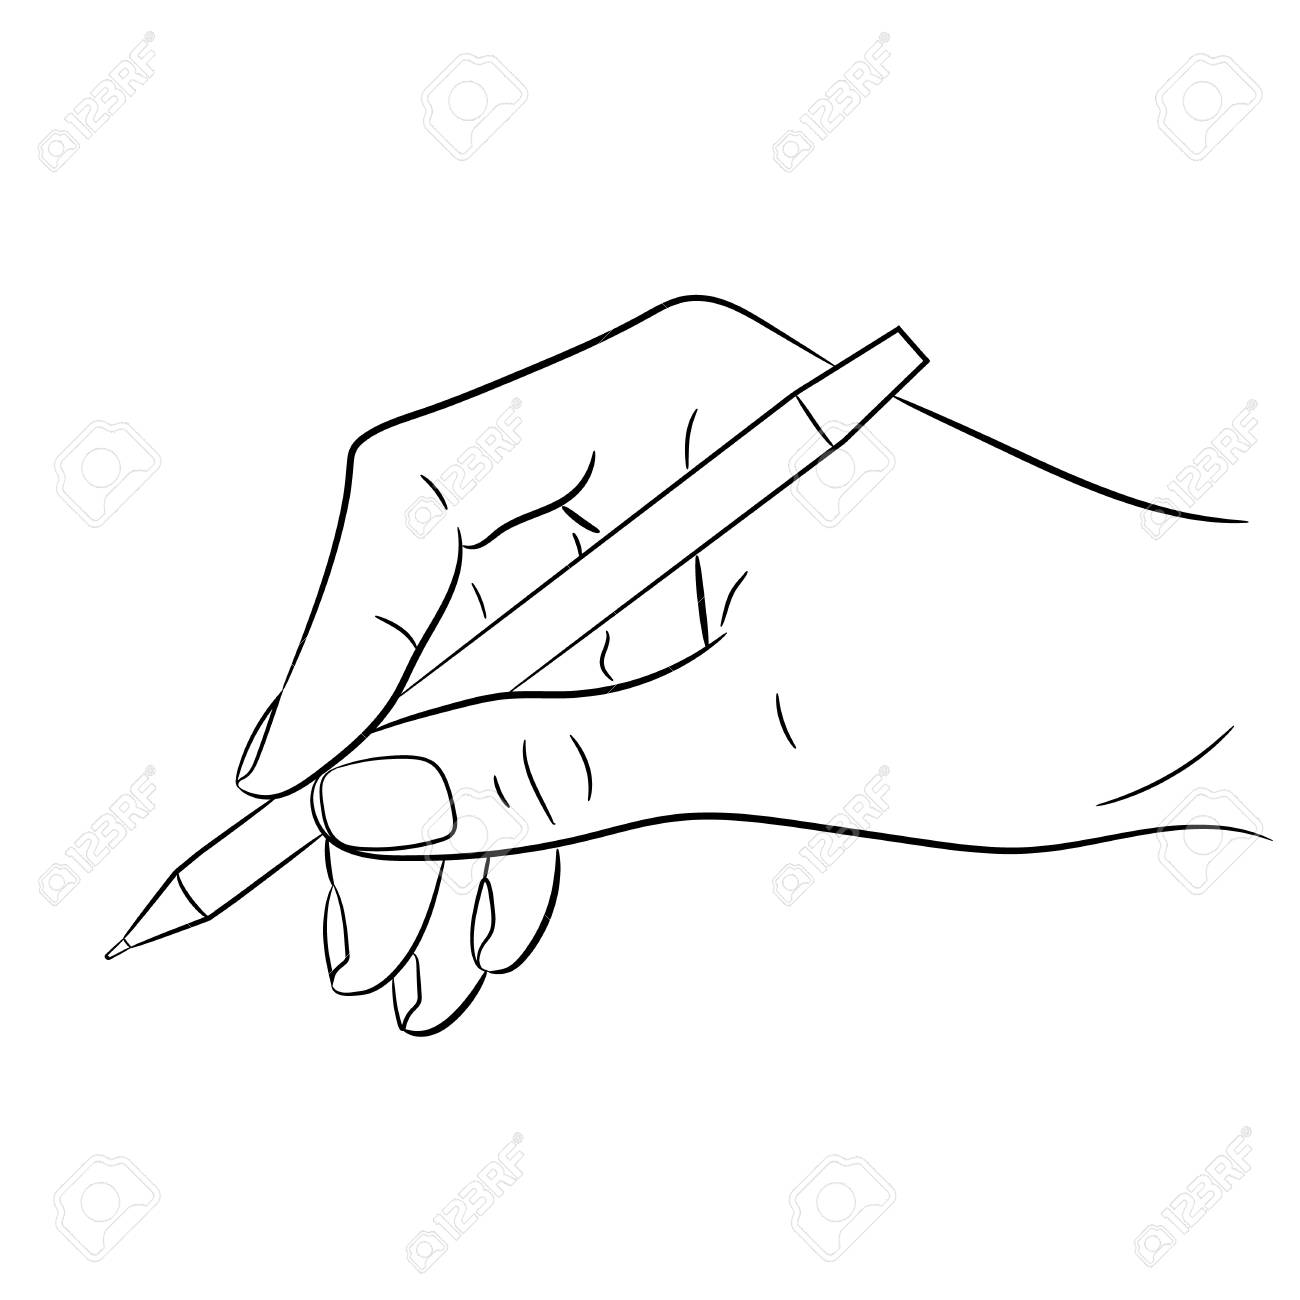 Free Drawn Pen hand holding, Download Free Clip Art on Owips